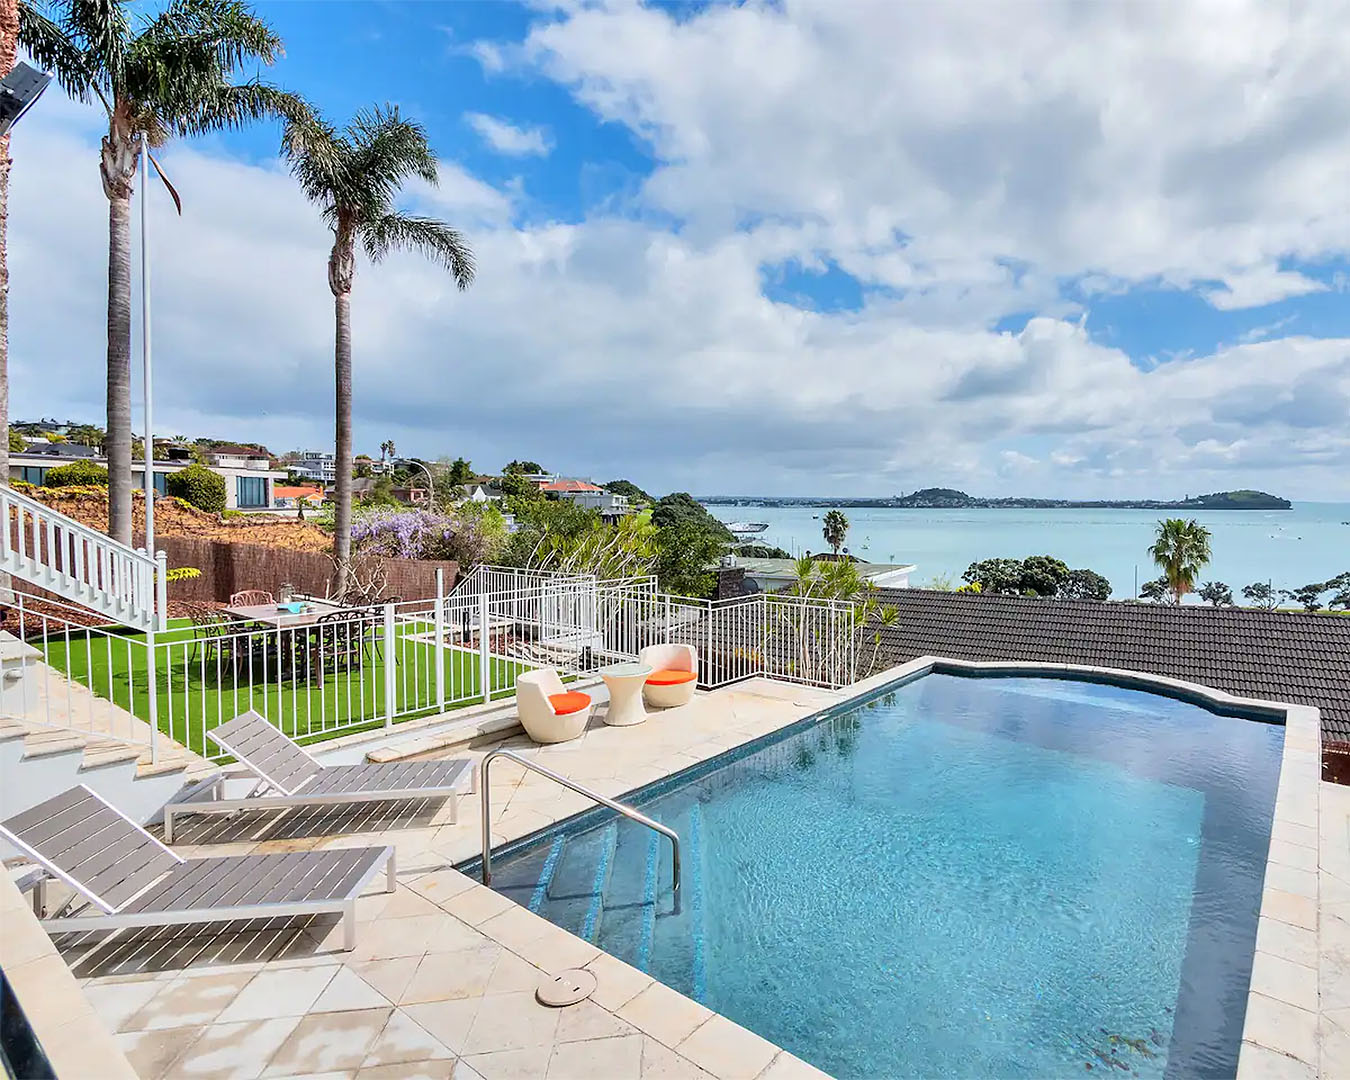 Palm trees overlook this stunning airbnb with pool in Remuera, one of the best airbnbs with pools in Auckland.